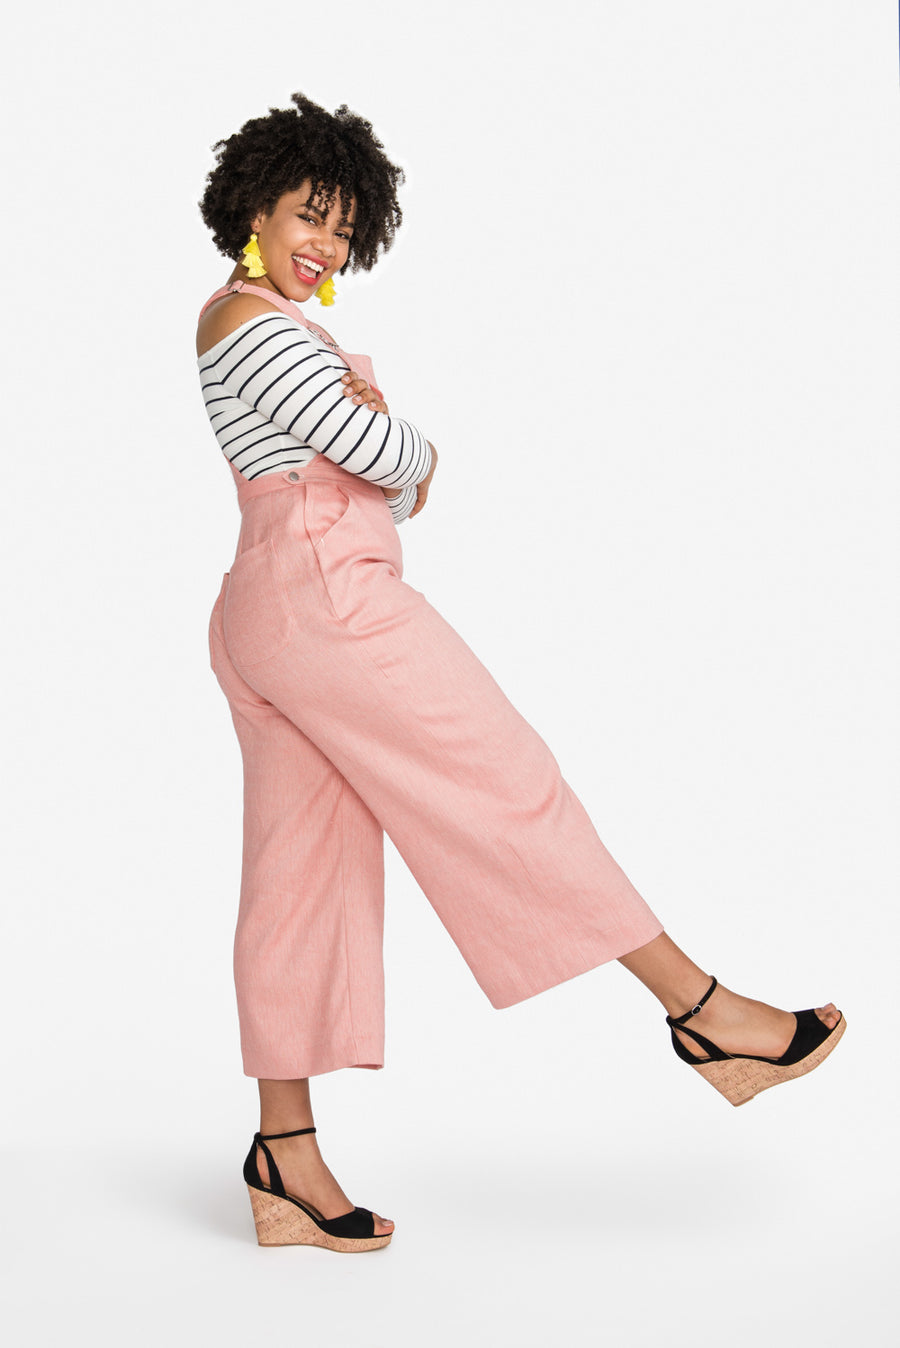 Vintage Sewing Patterns PDF - Jumpsuits, Culottes, Dungarees